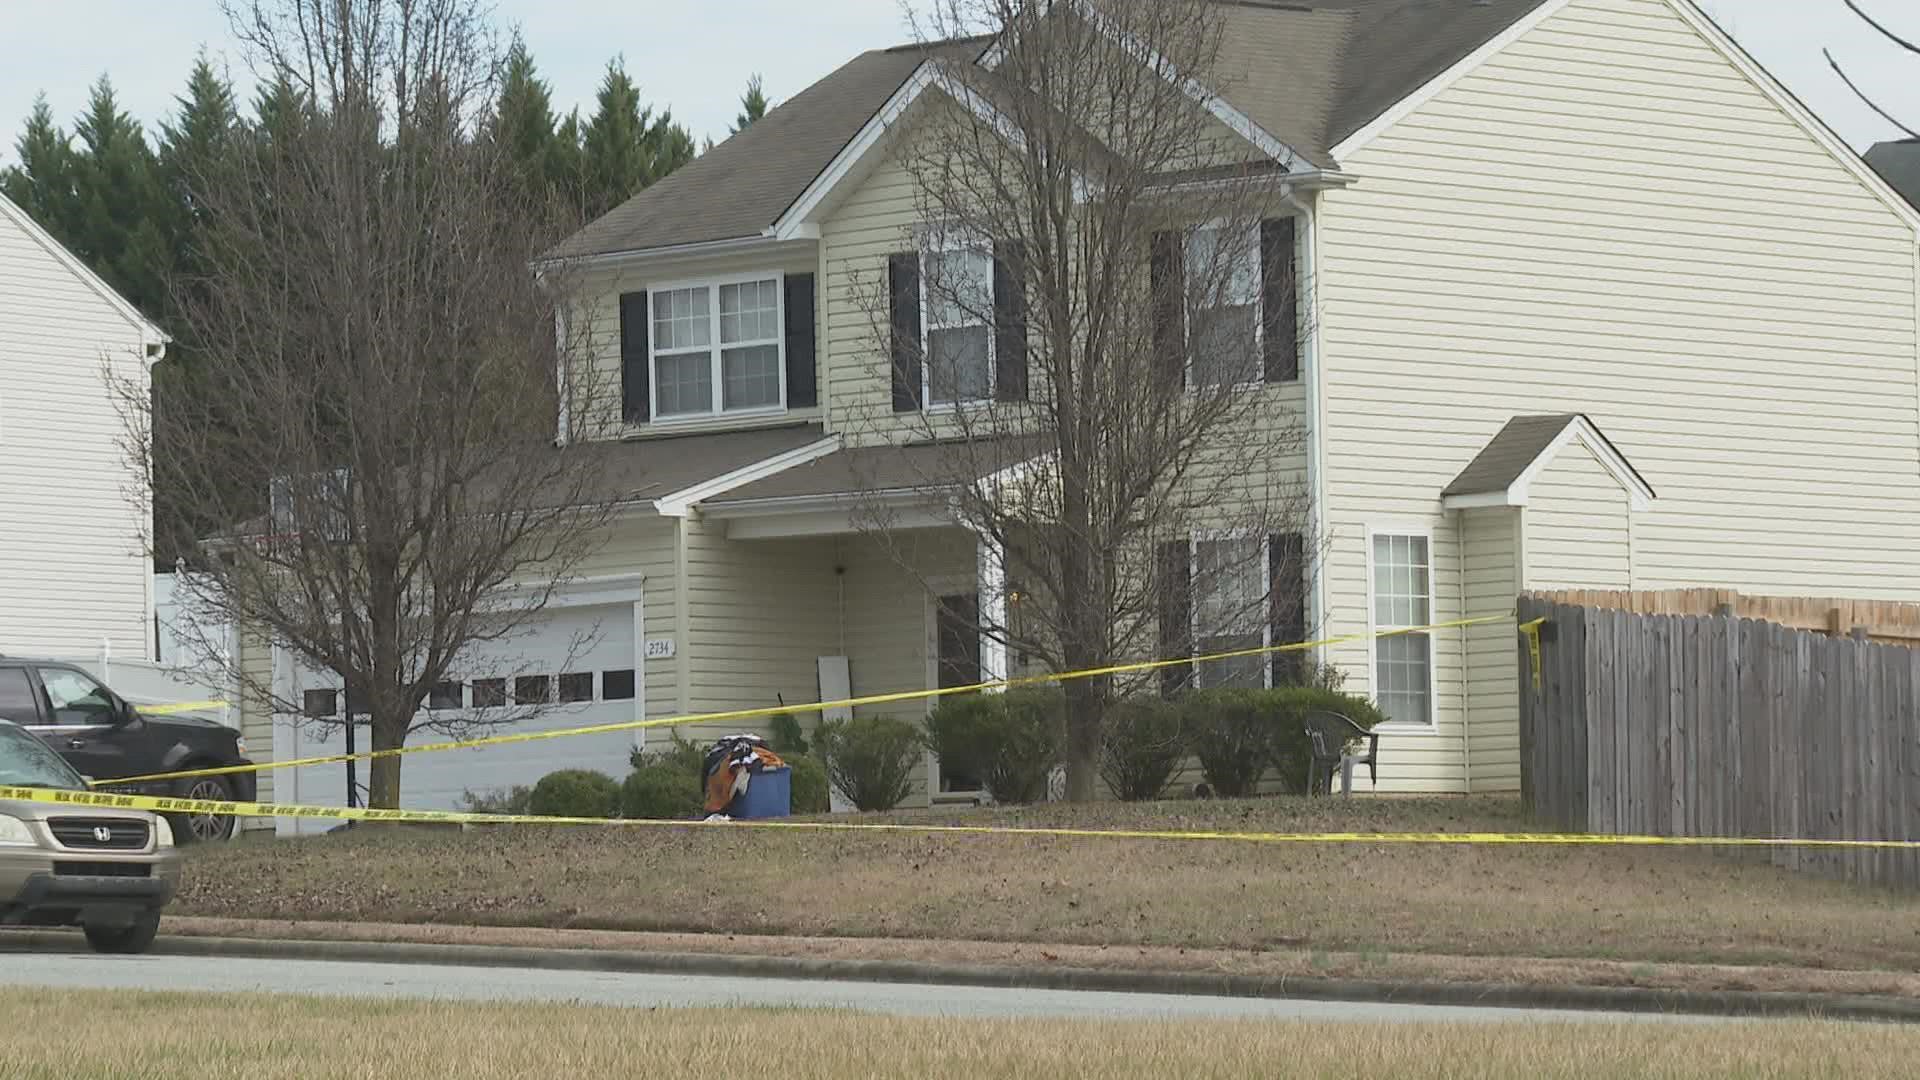 Police said neighbors called 911 after two people came running for help from a home on Mossy Meadow Drive. Five people, including three children were killed.